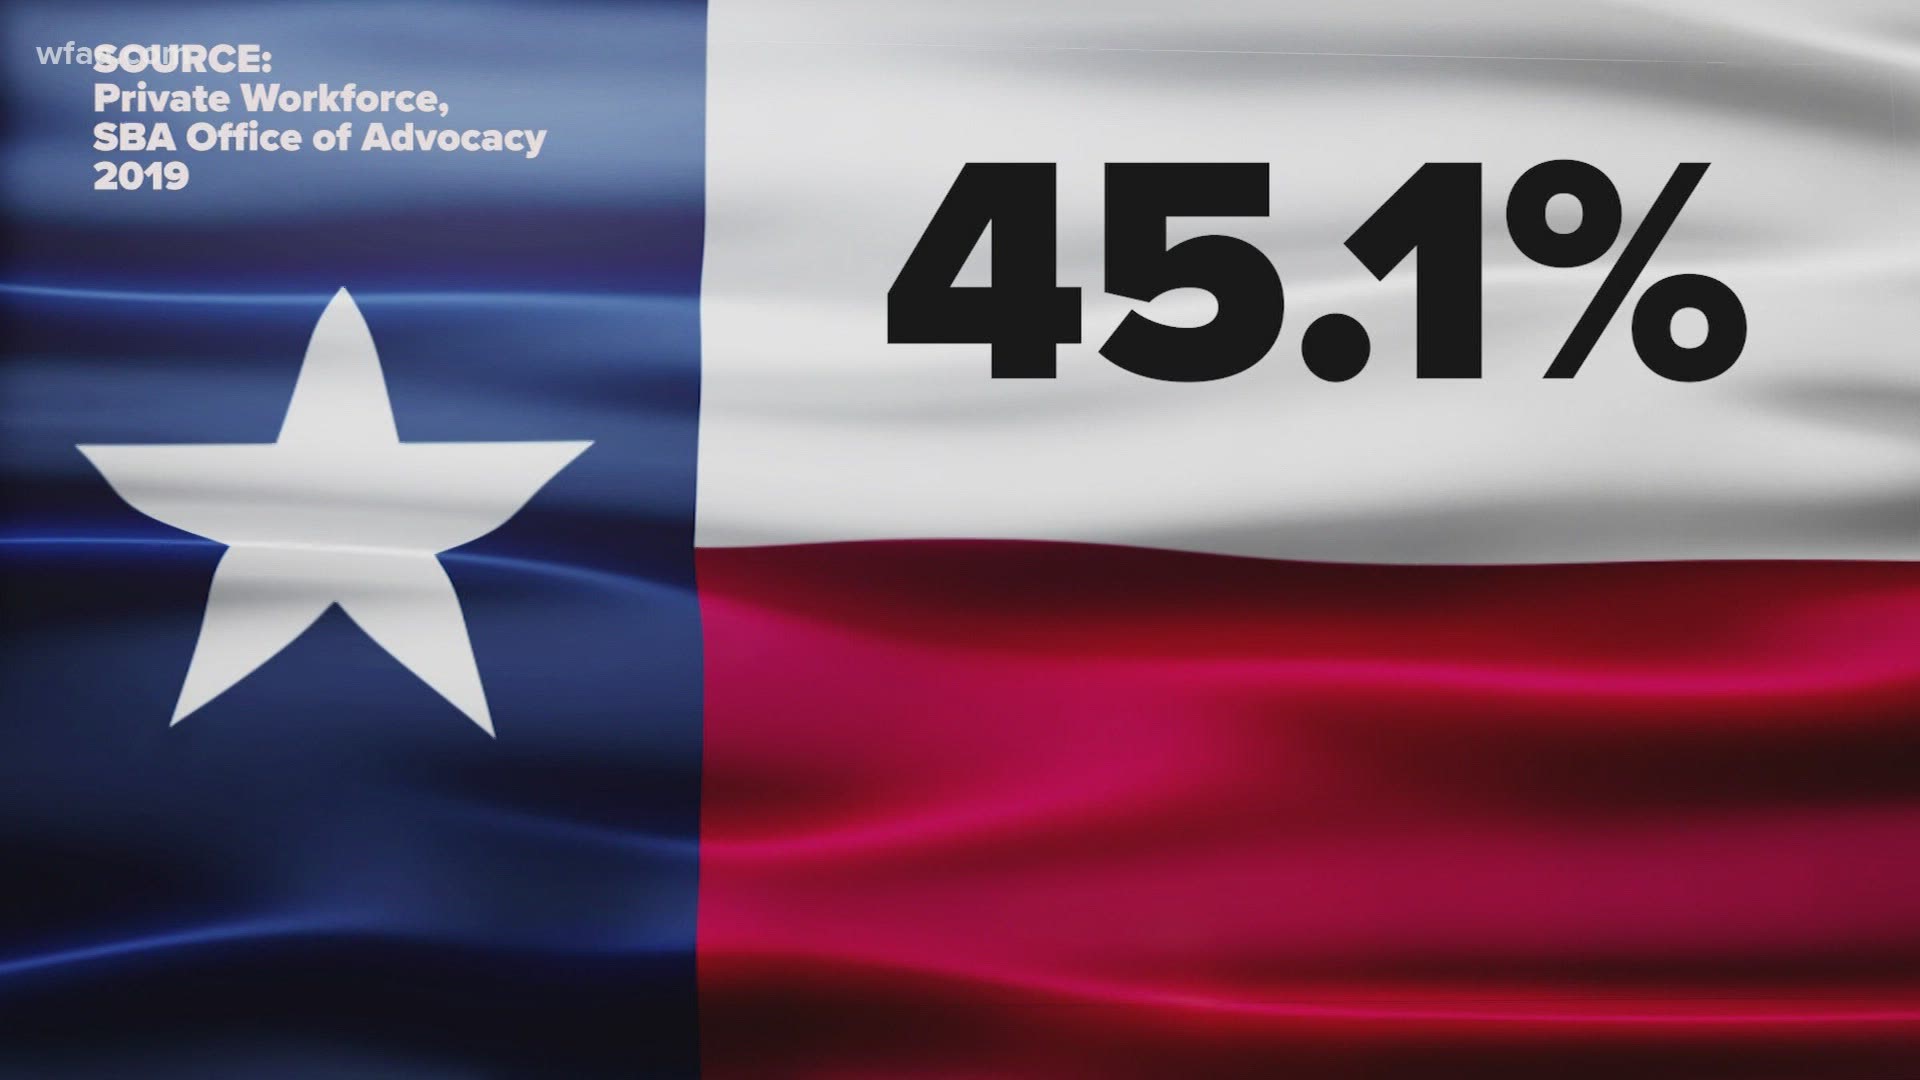 Small businesses provide around 45% of jobs in Texas.